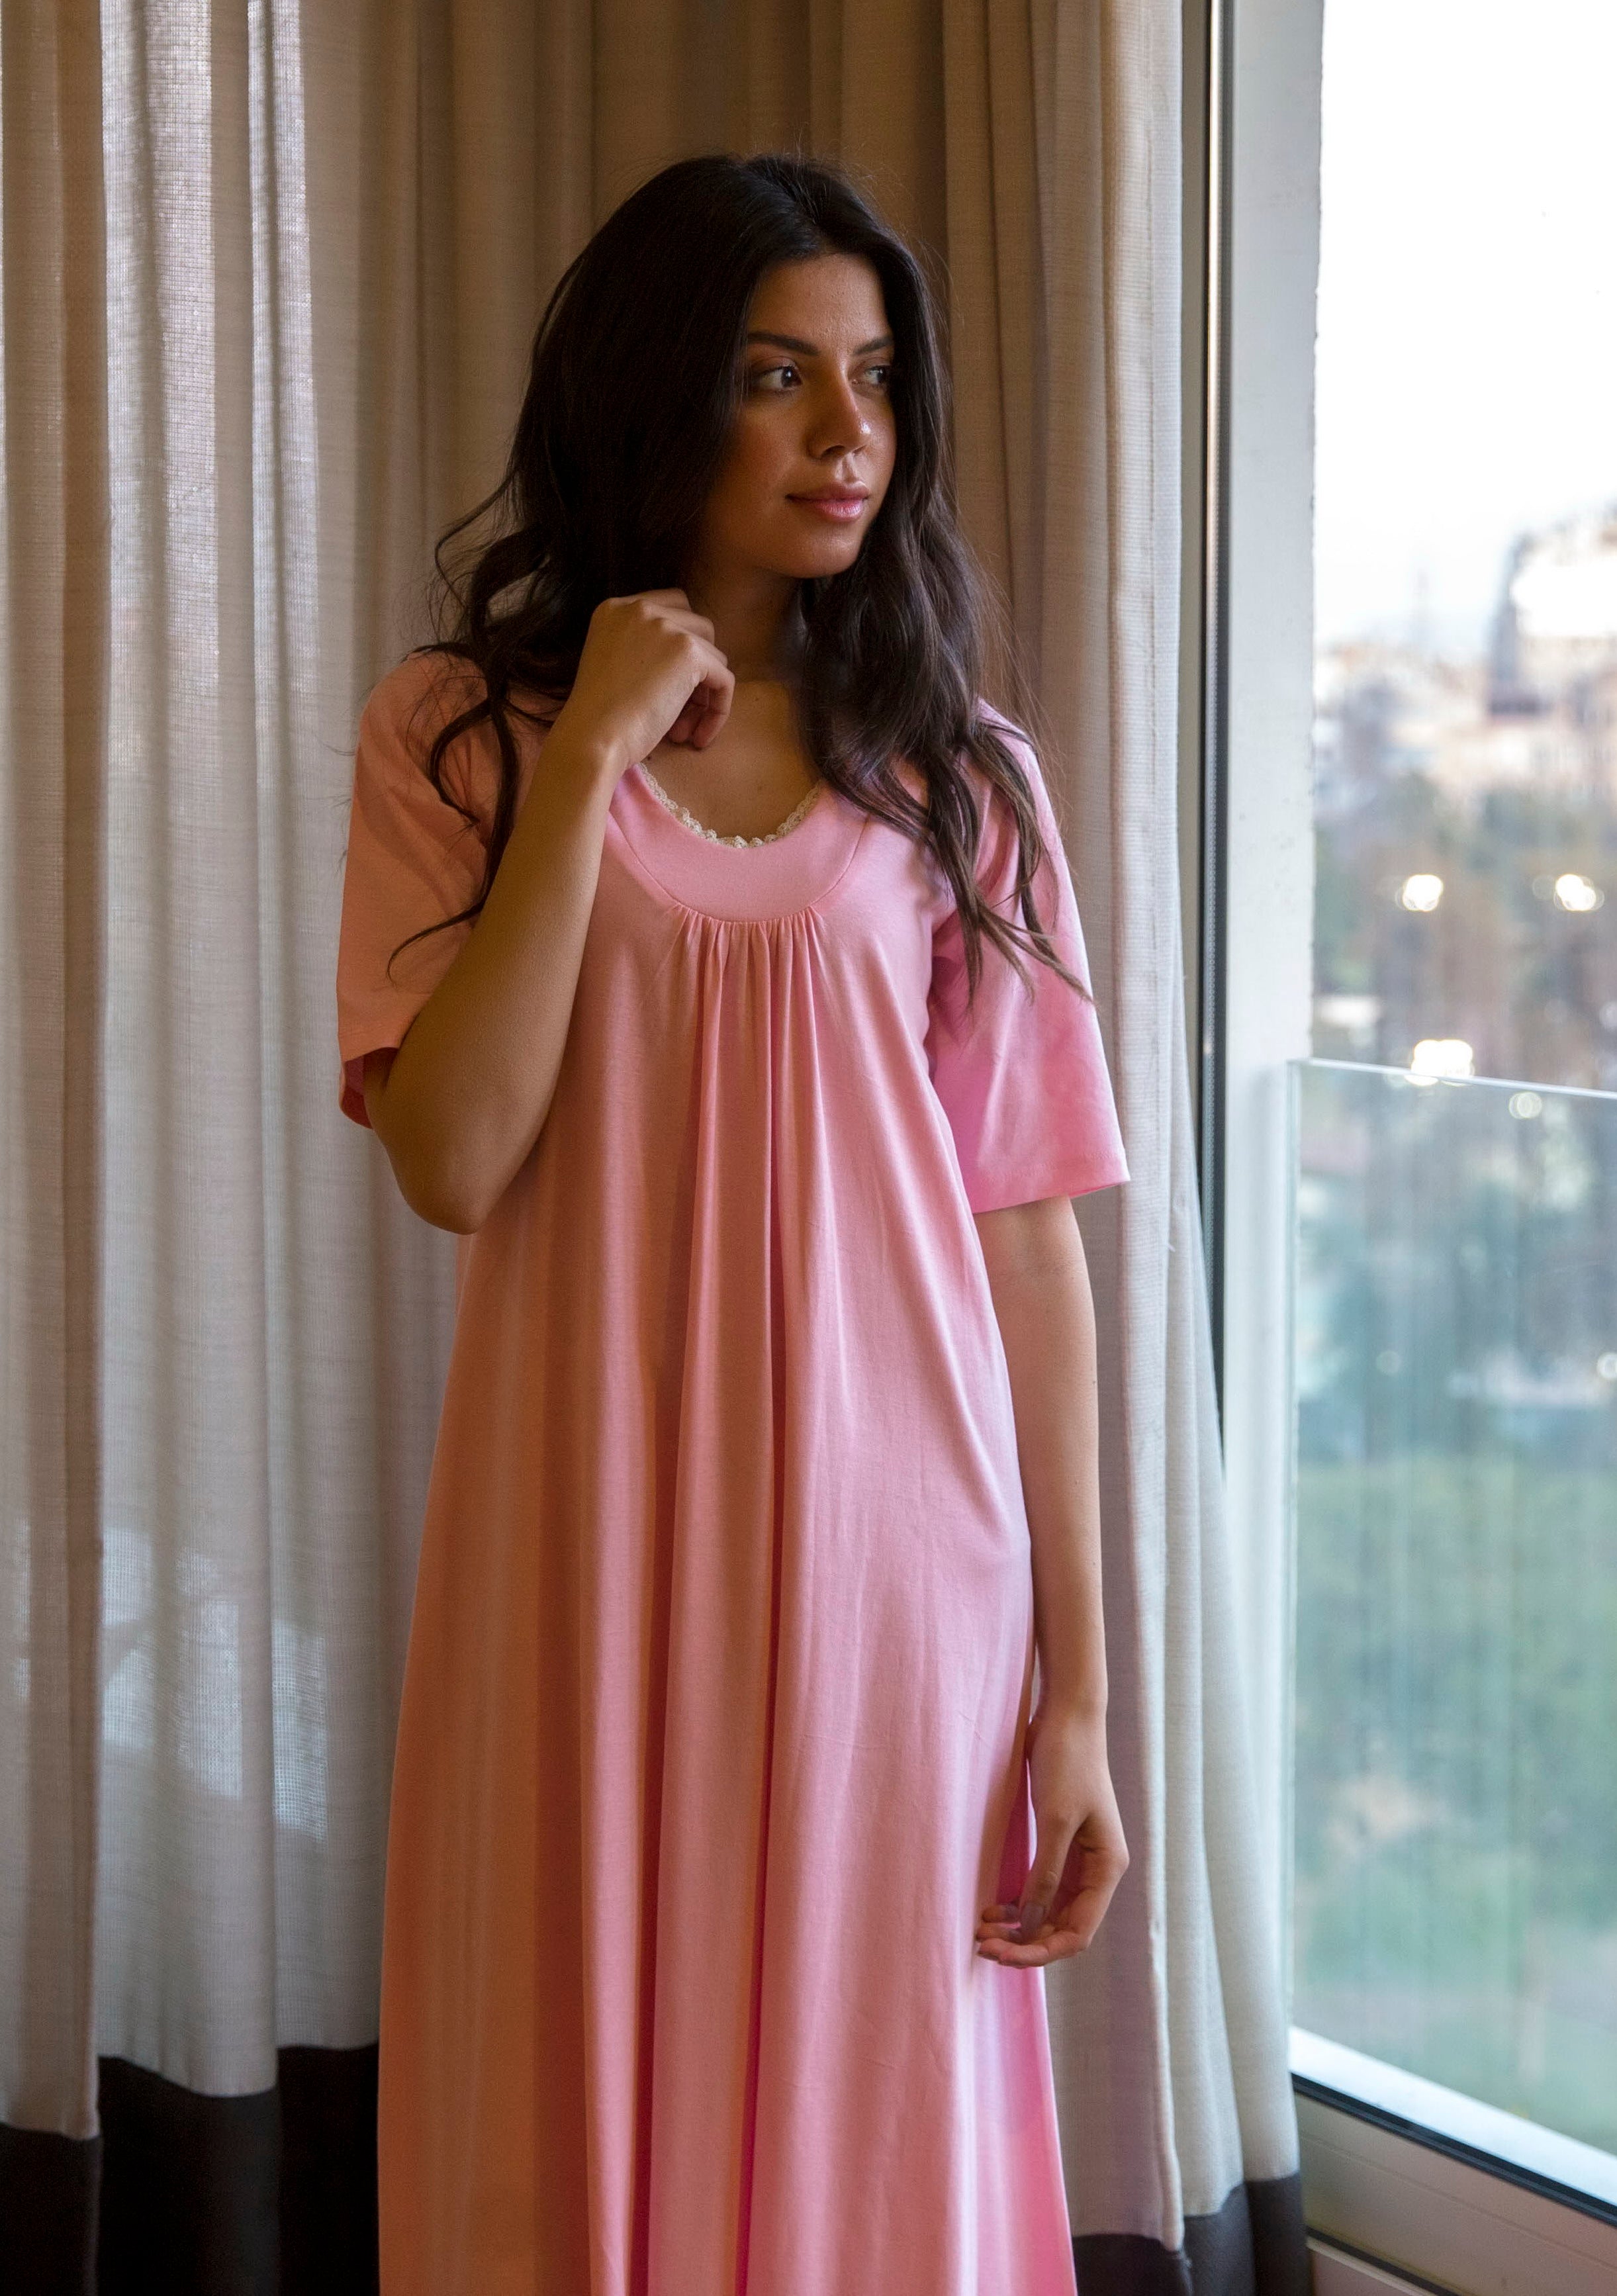 Delicate Nightgown with simple lace on neck opening